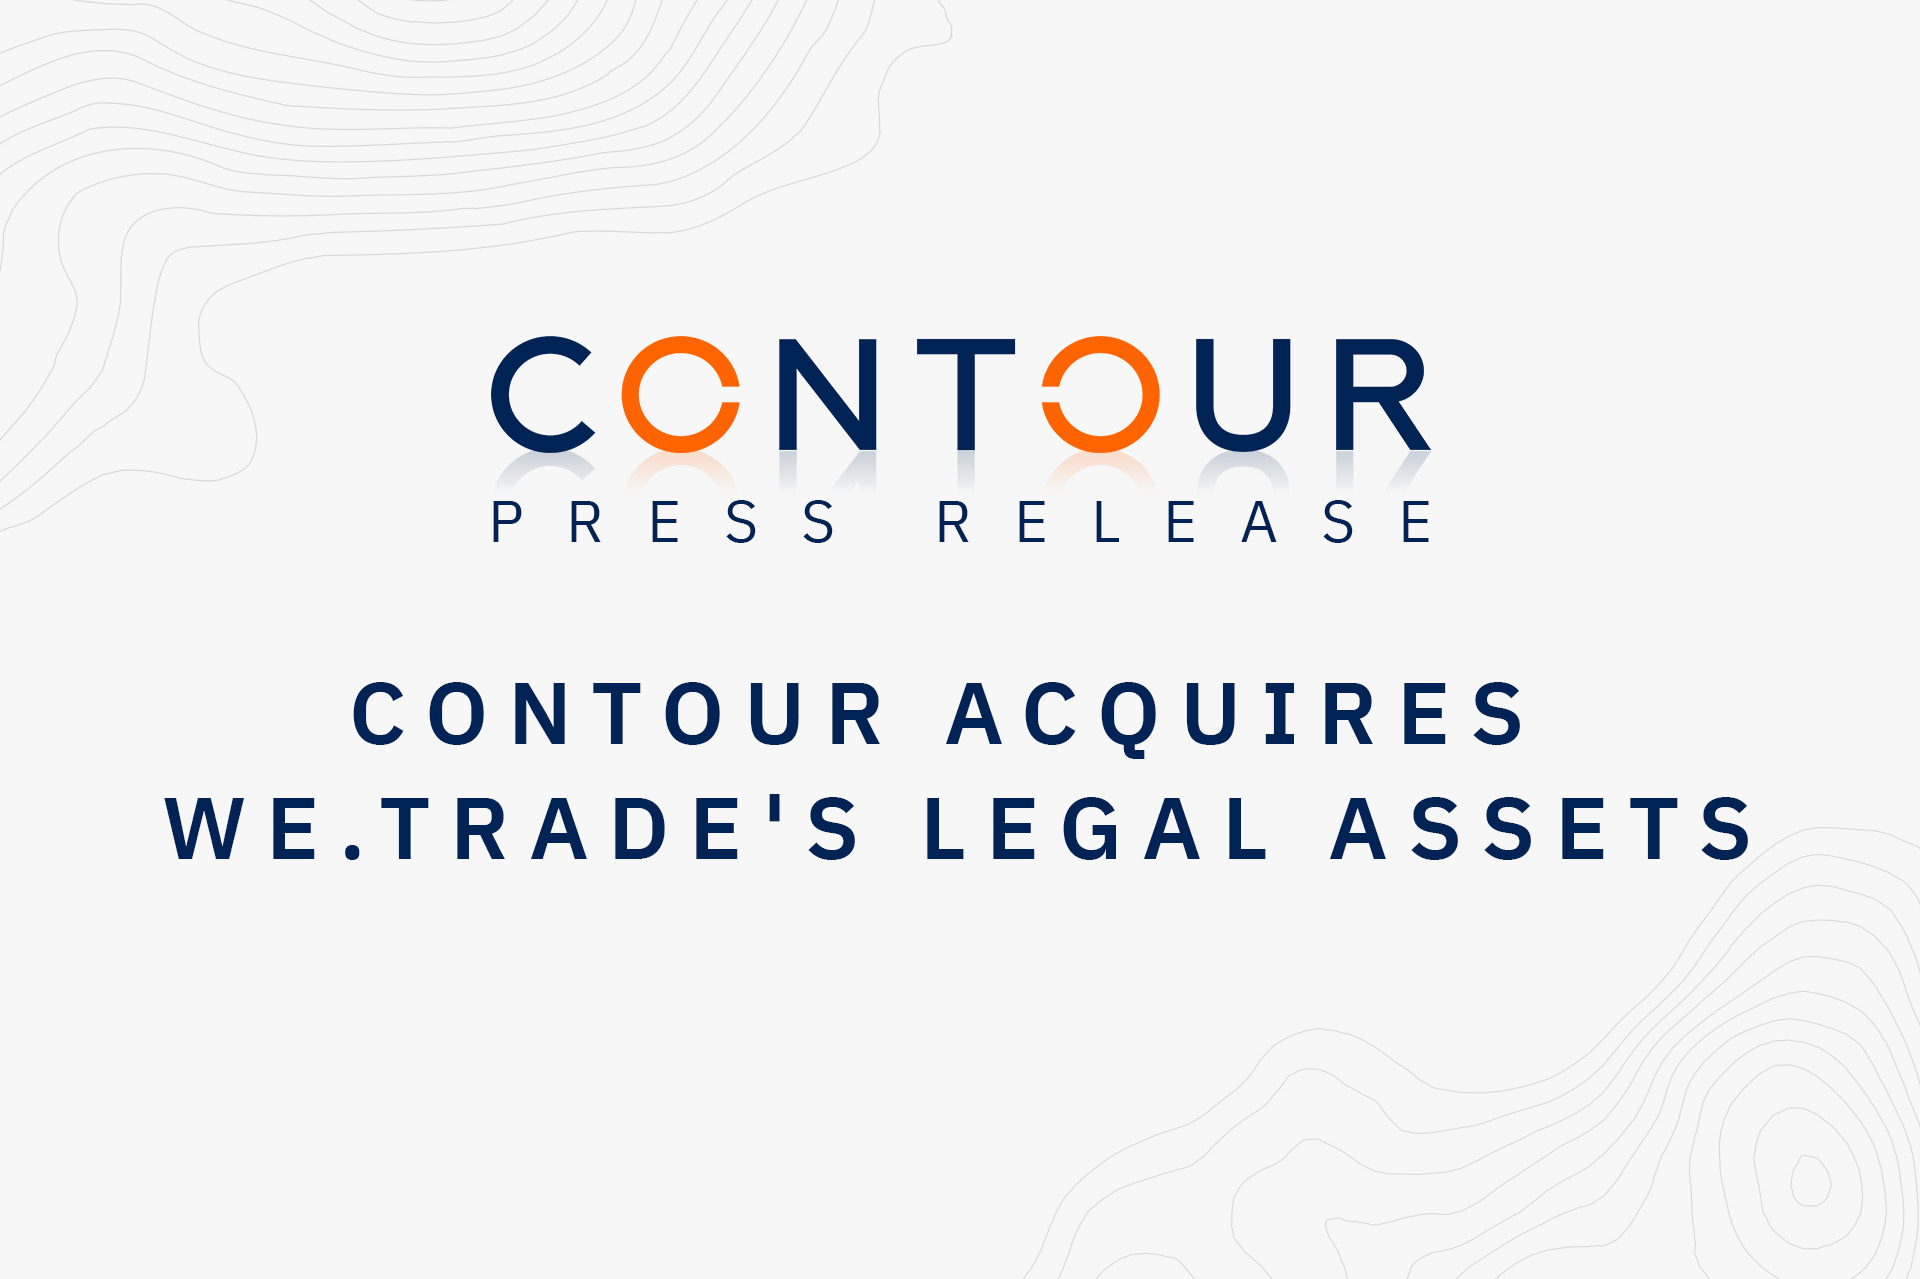 Contour leads the consolidation in the blockchain trade finance industry with acquisition of we.trade’s legal assets